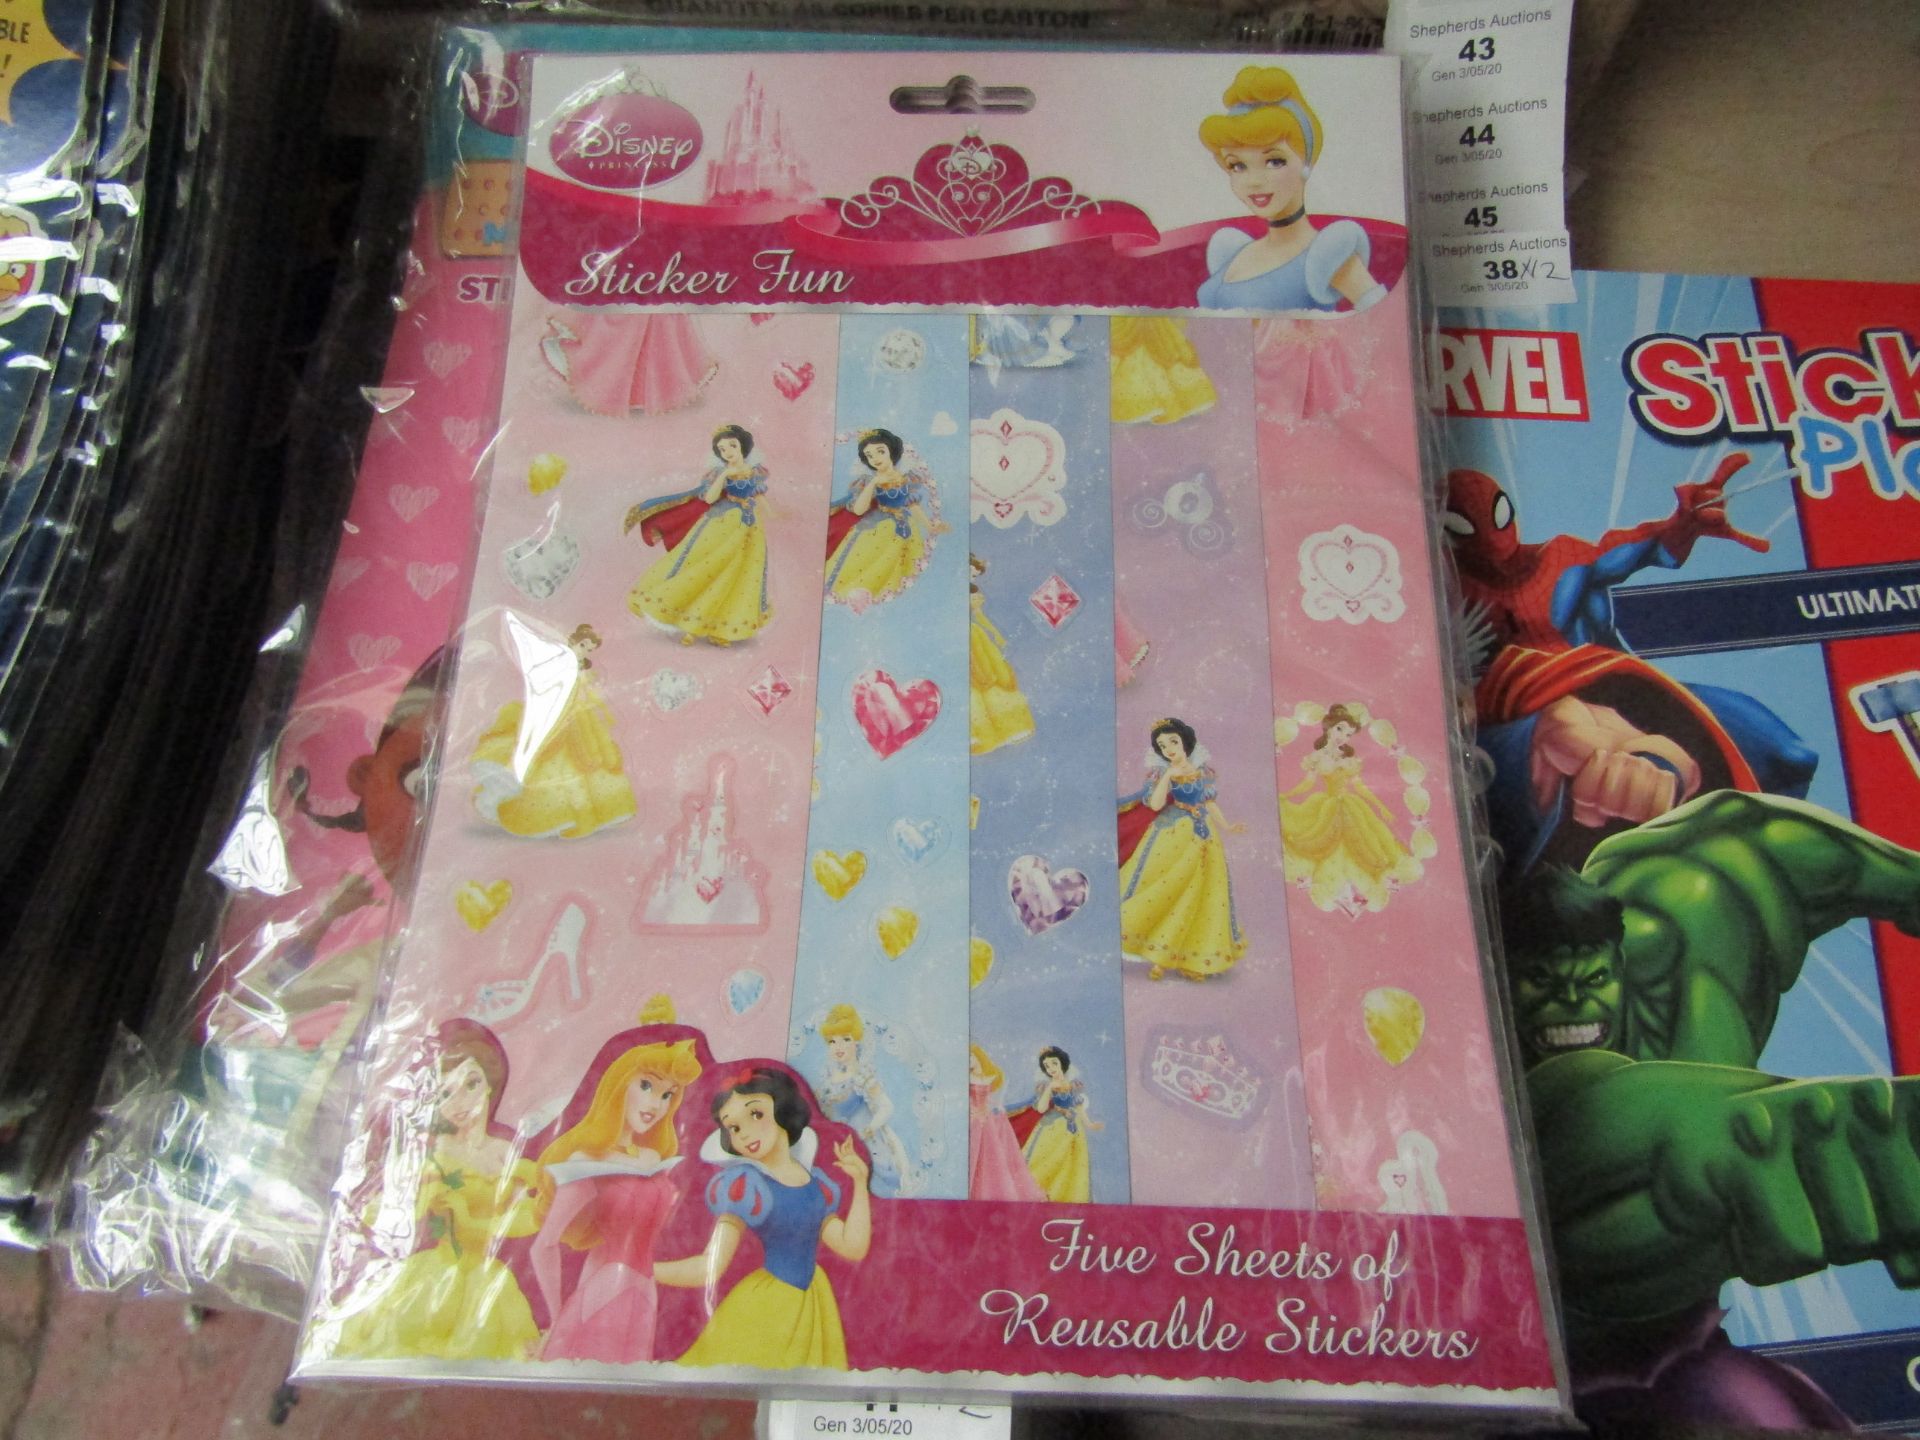 12 x Disney princess Sticker Fun Books with 5 Sheets of Reusable Stickers in each Book. New &